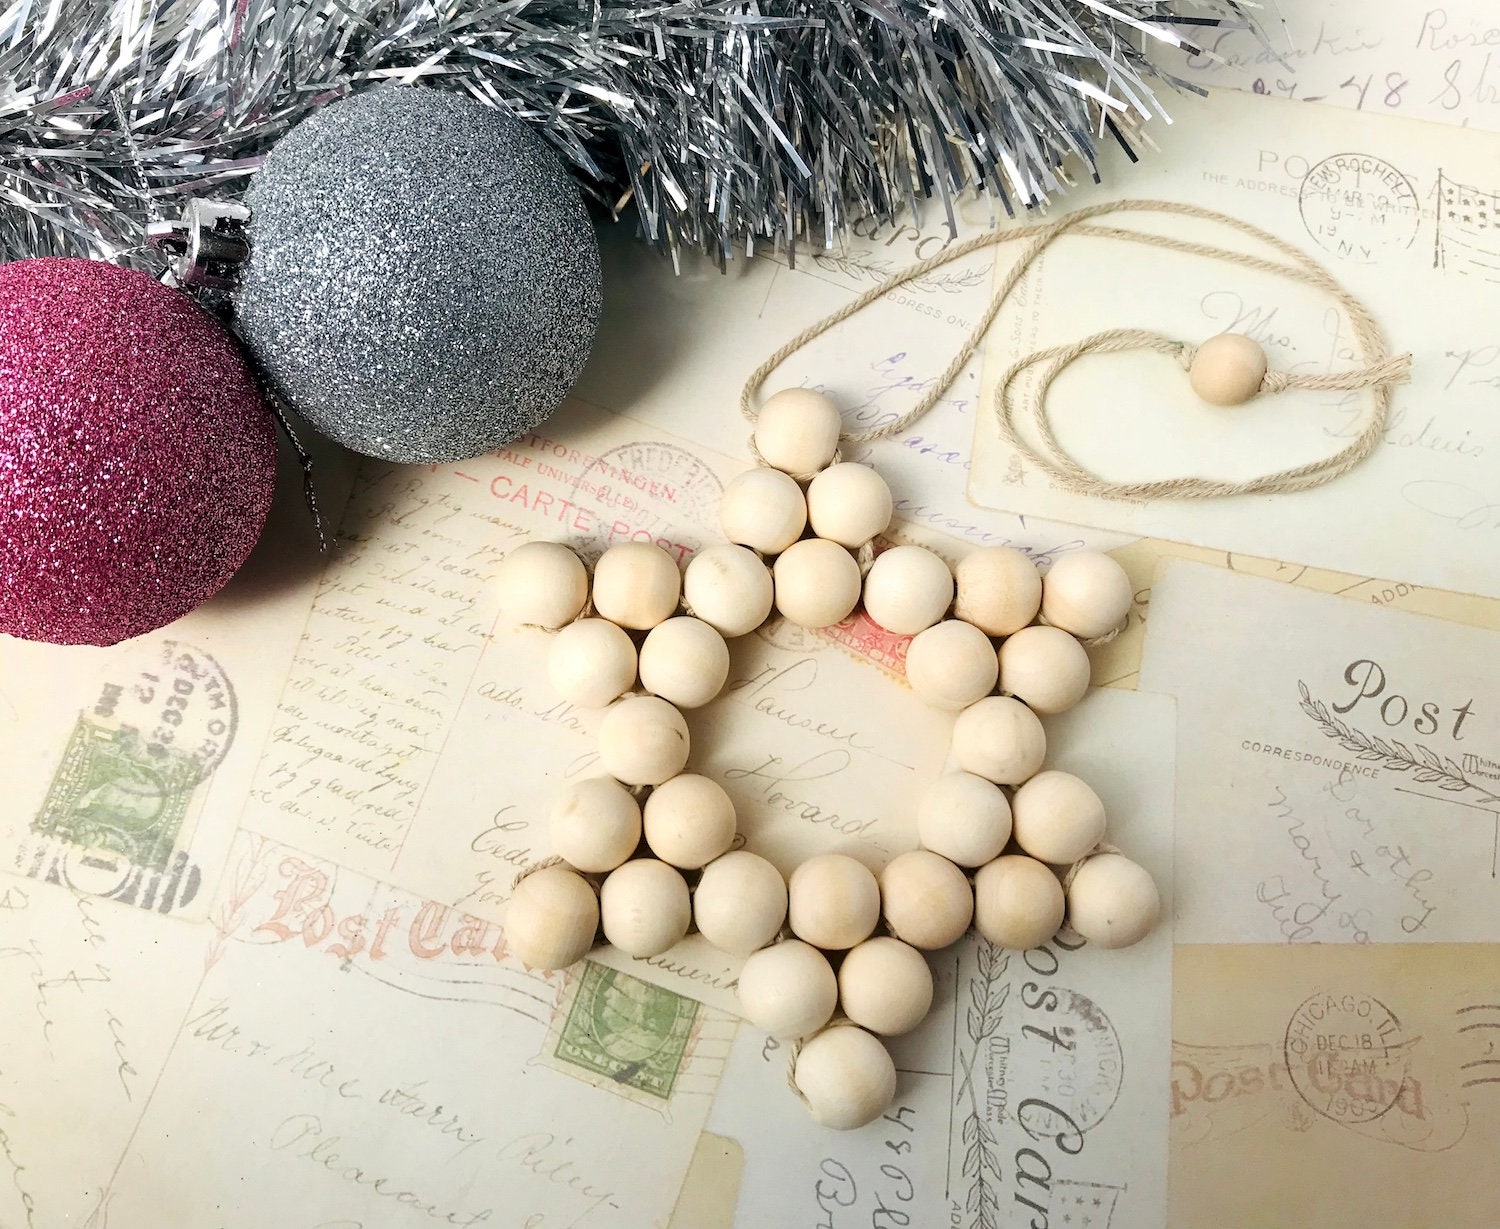 DIY Christmas Ornaments with Wood Beads  Diy christmas ornaments,  Christmas ornament crafts, Christmas crafts